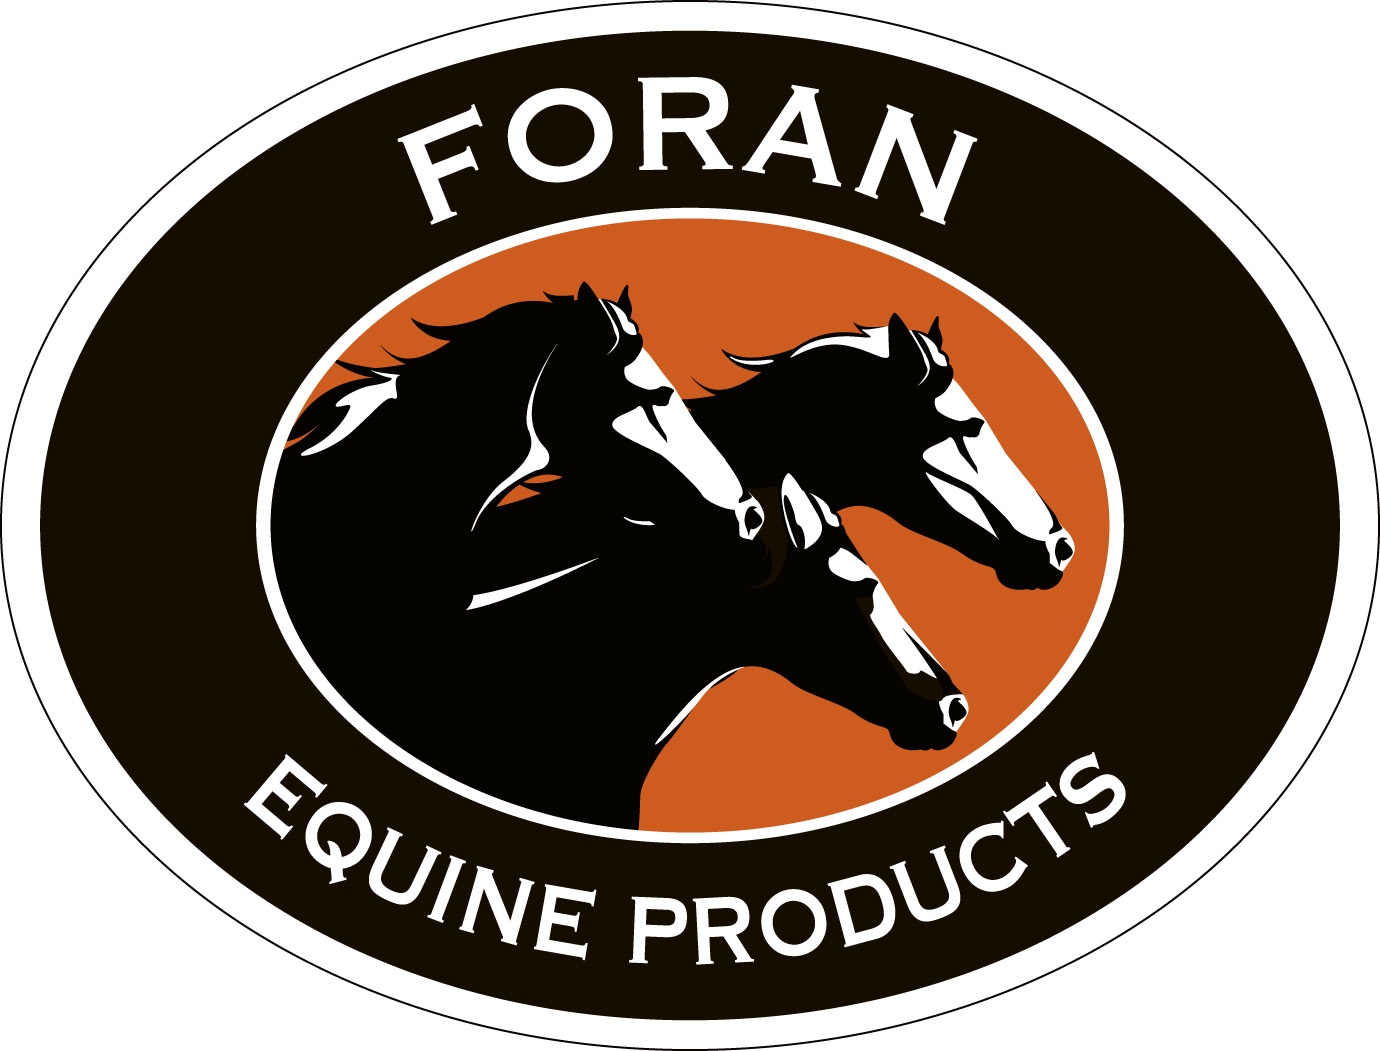 Foran Equine Products